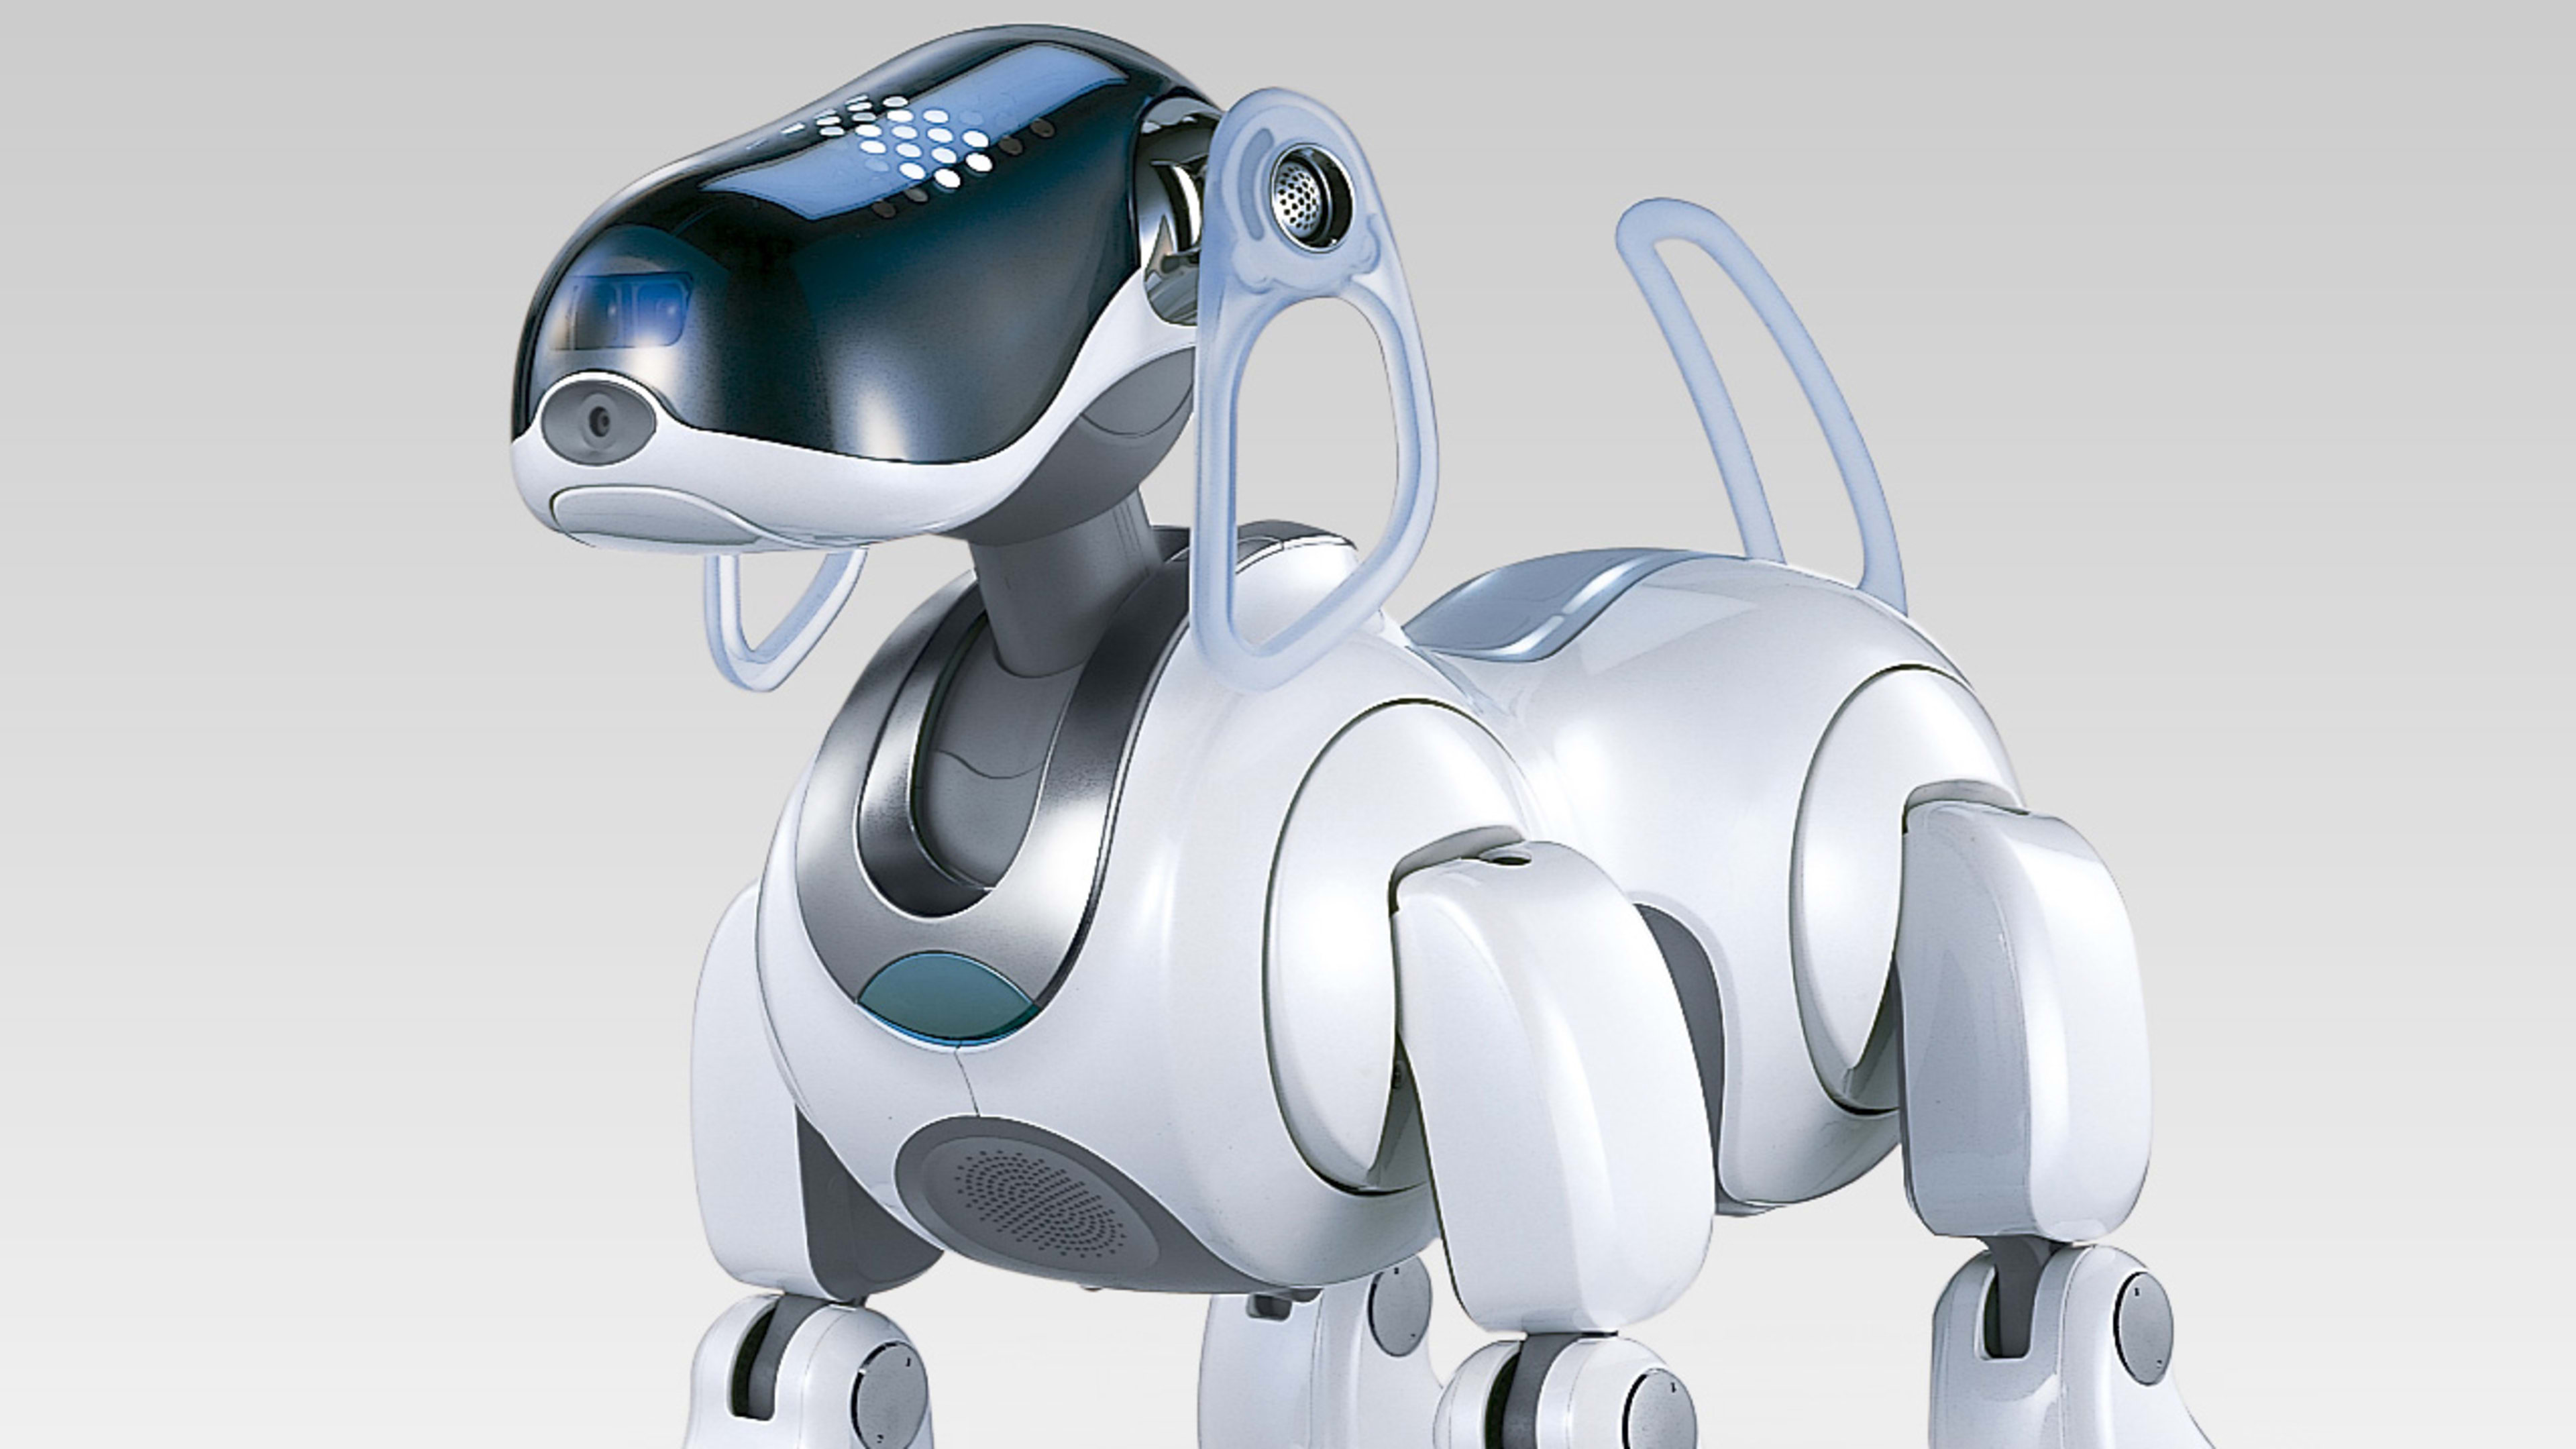 Sony is bringing its robot dog Aibo back to compete with Alexa: Report